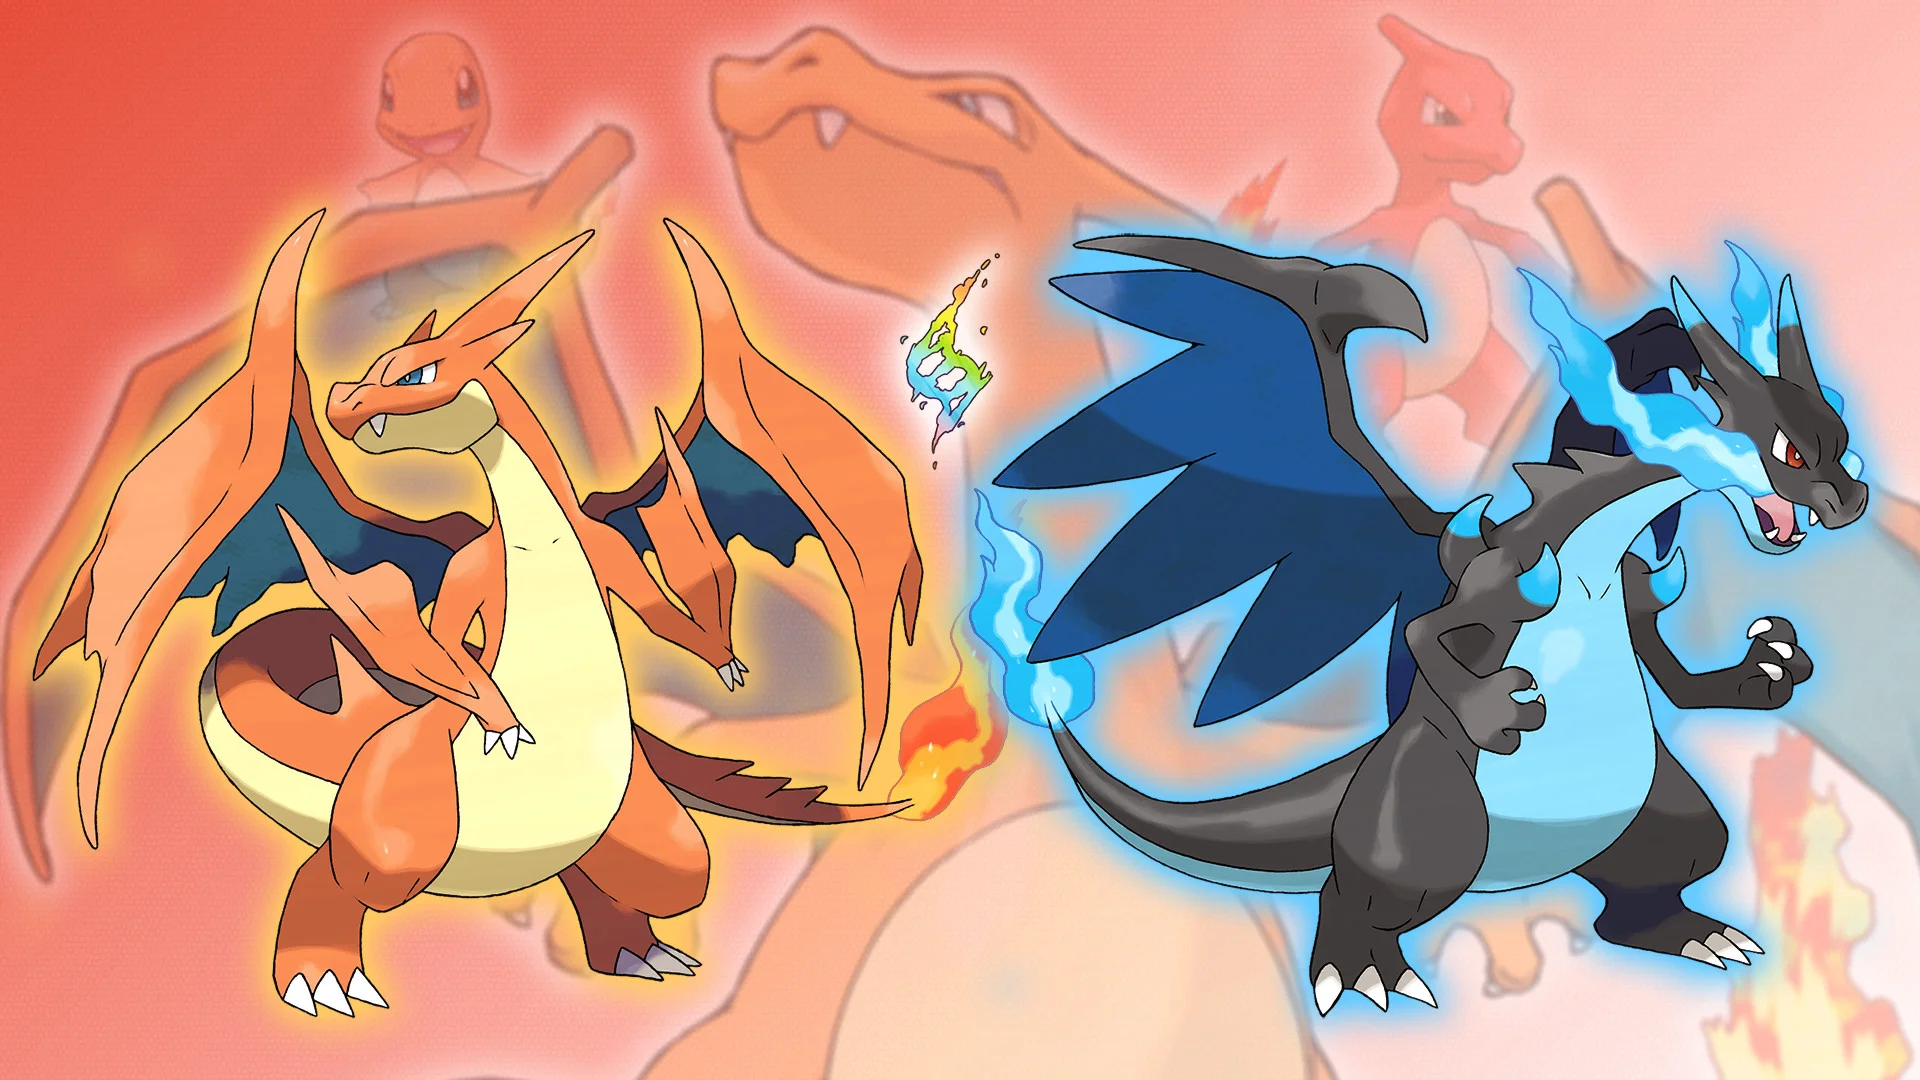 Charmeleon, Charizard, and Megas X / Y by Glench